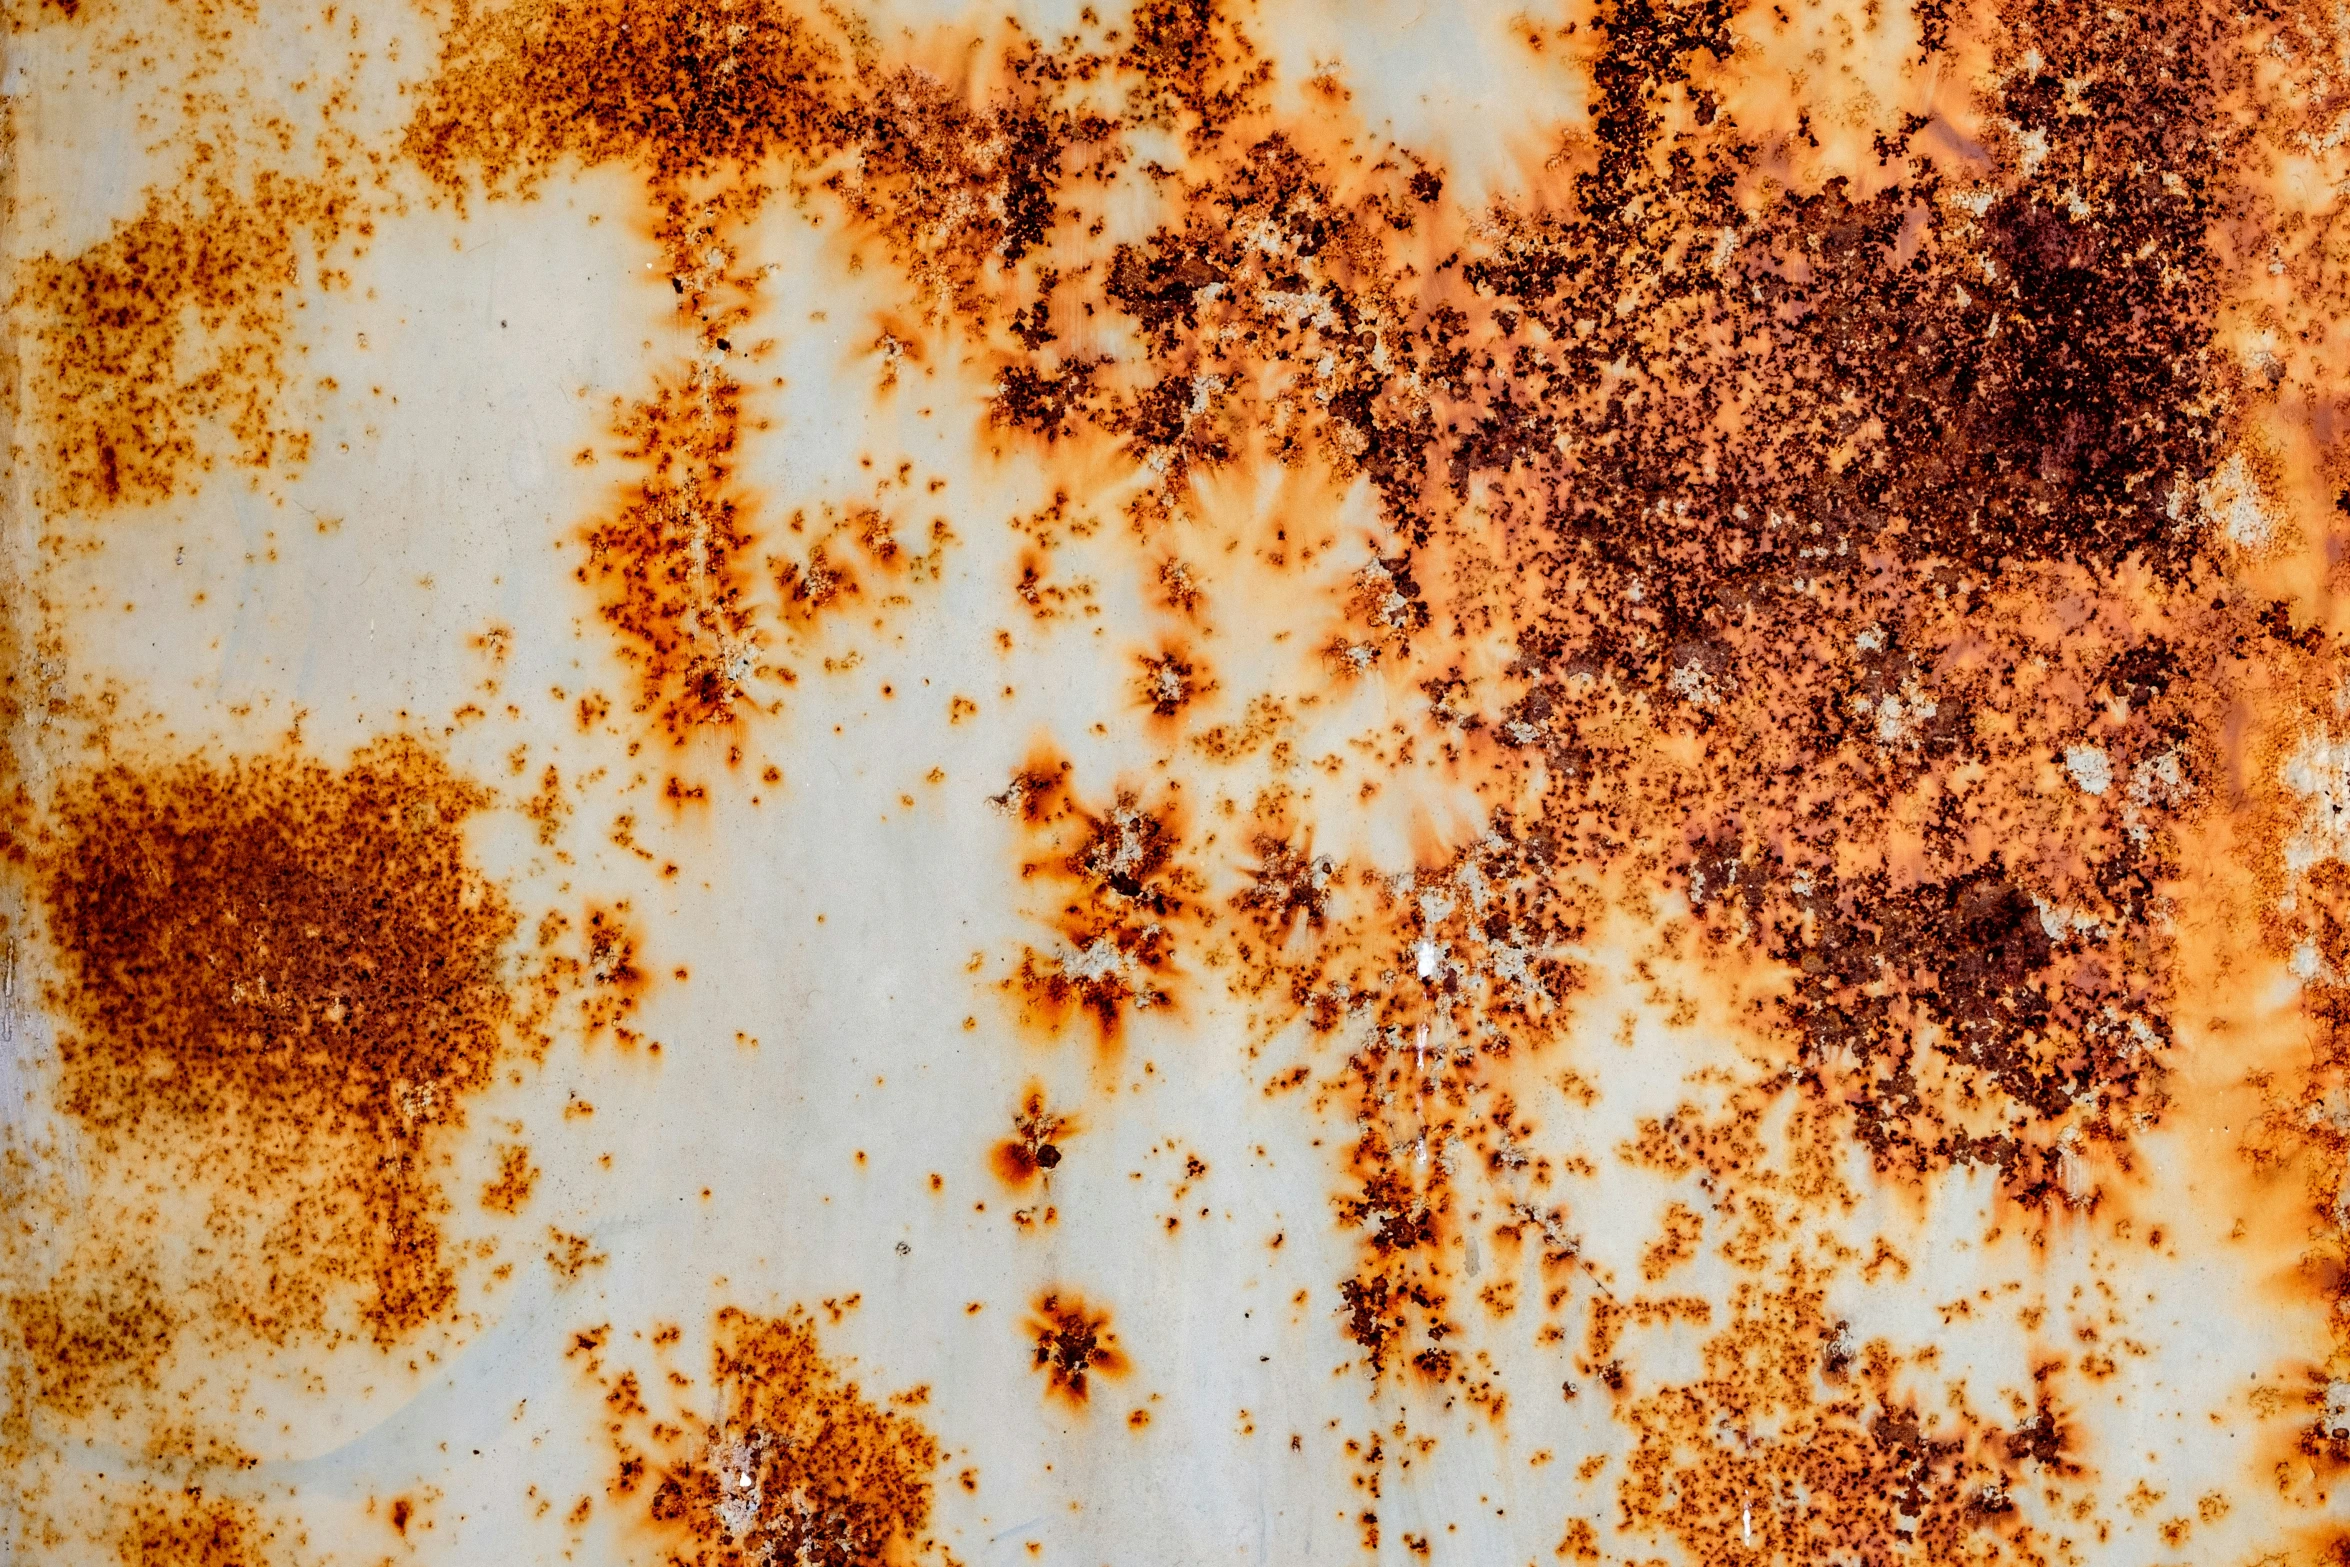 rust and white paint is seen on the wall